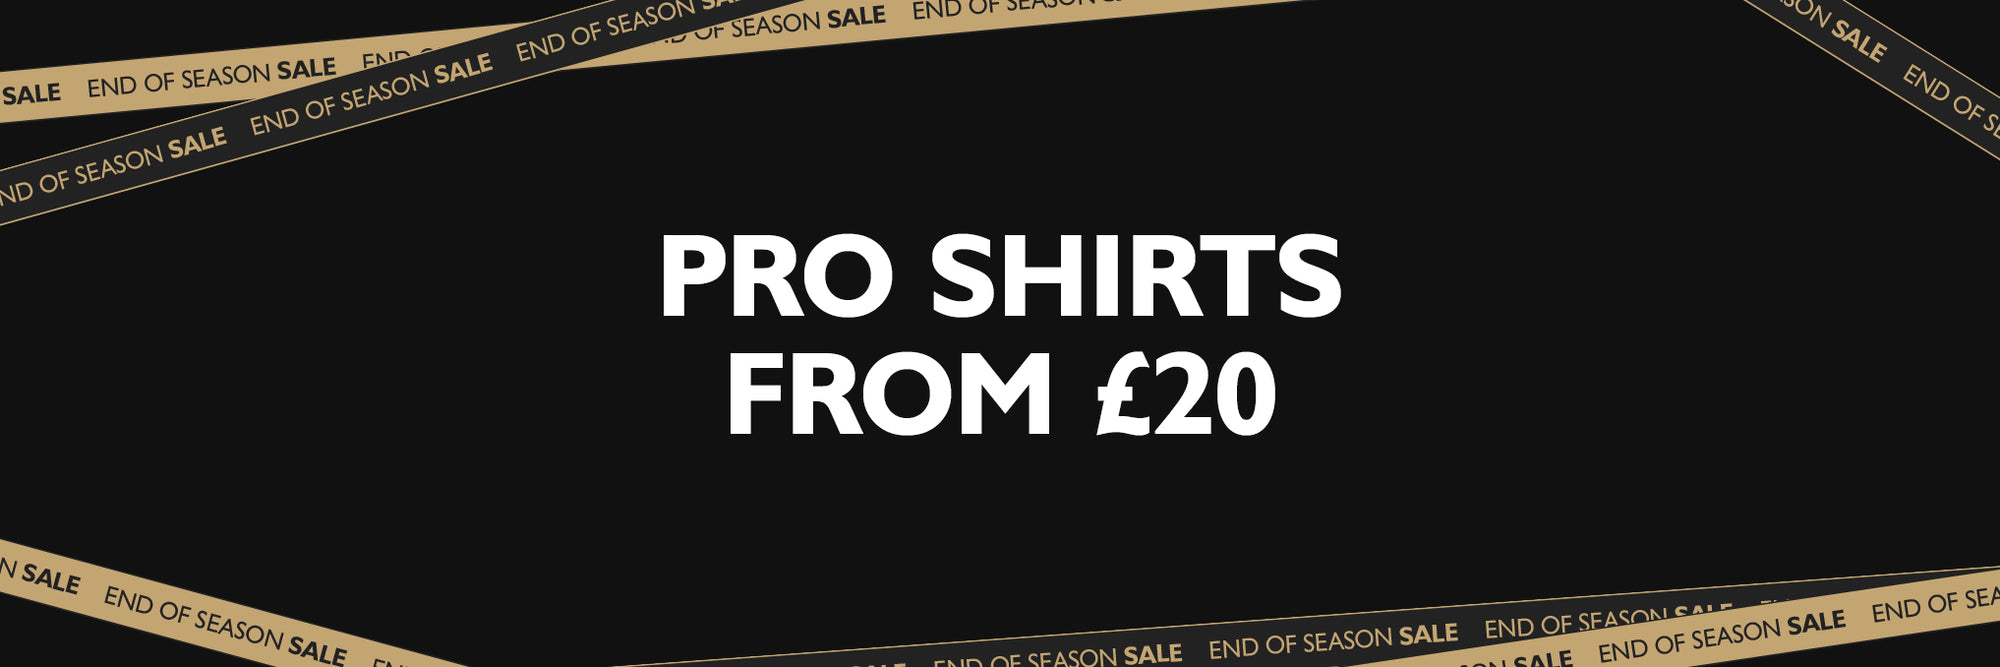 23/24 End Of Season Sale - Pro Kits From £20